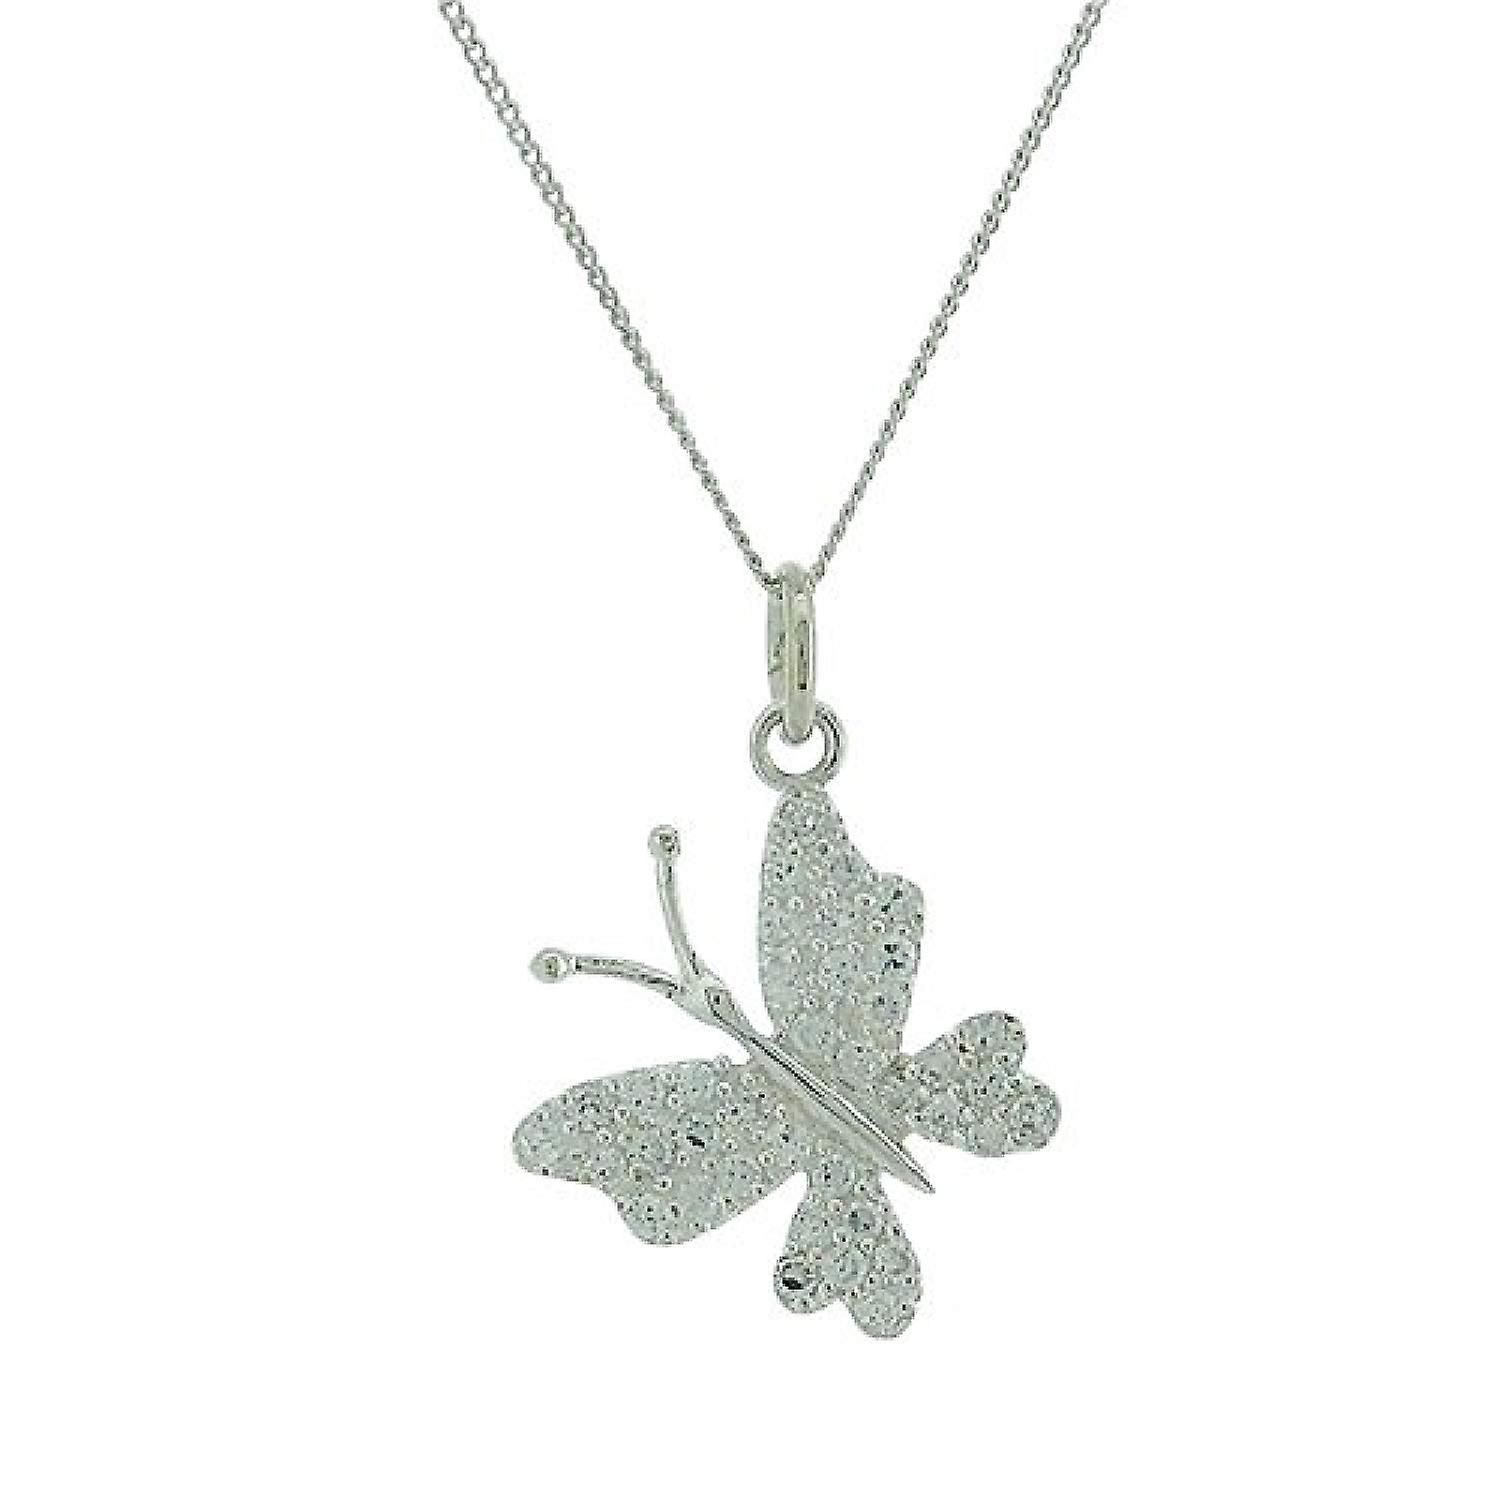 Toc Sterling Silver Clear Cz Pave Butterfly Pendant Necklace 18 Inside Recent Pavé Butterfly Pendant Necklaces (View 4 of 25)